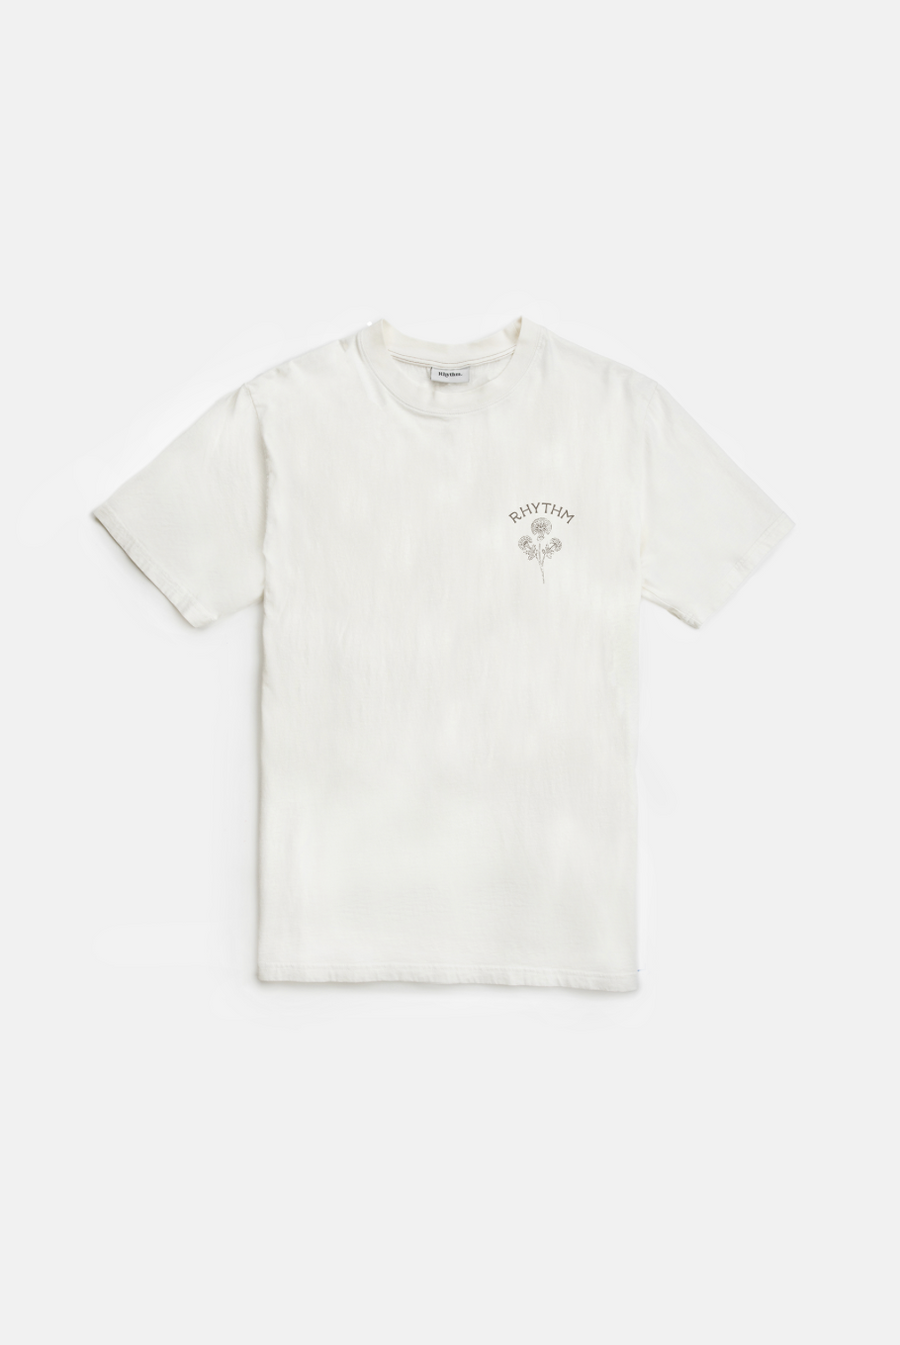 Rhythm Wish SS T-Shirt Natural | Collective Request 